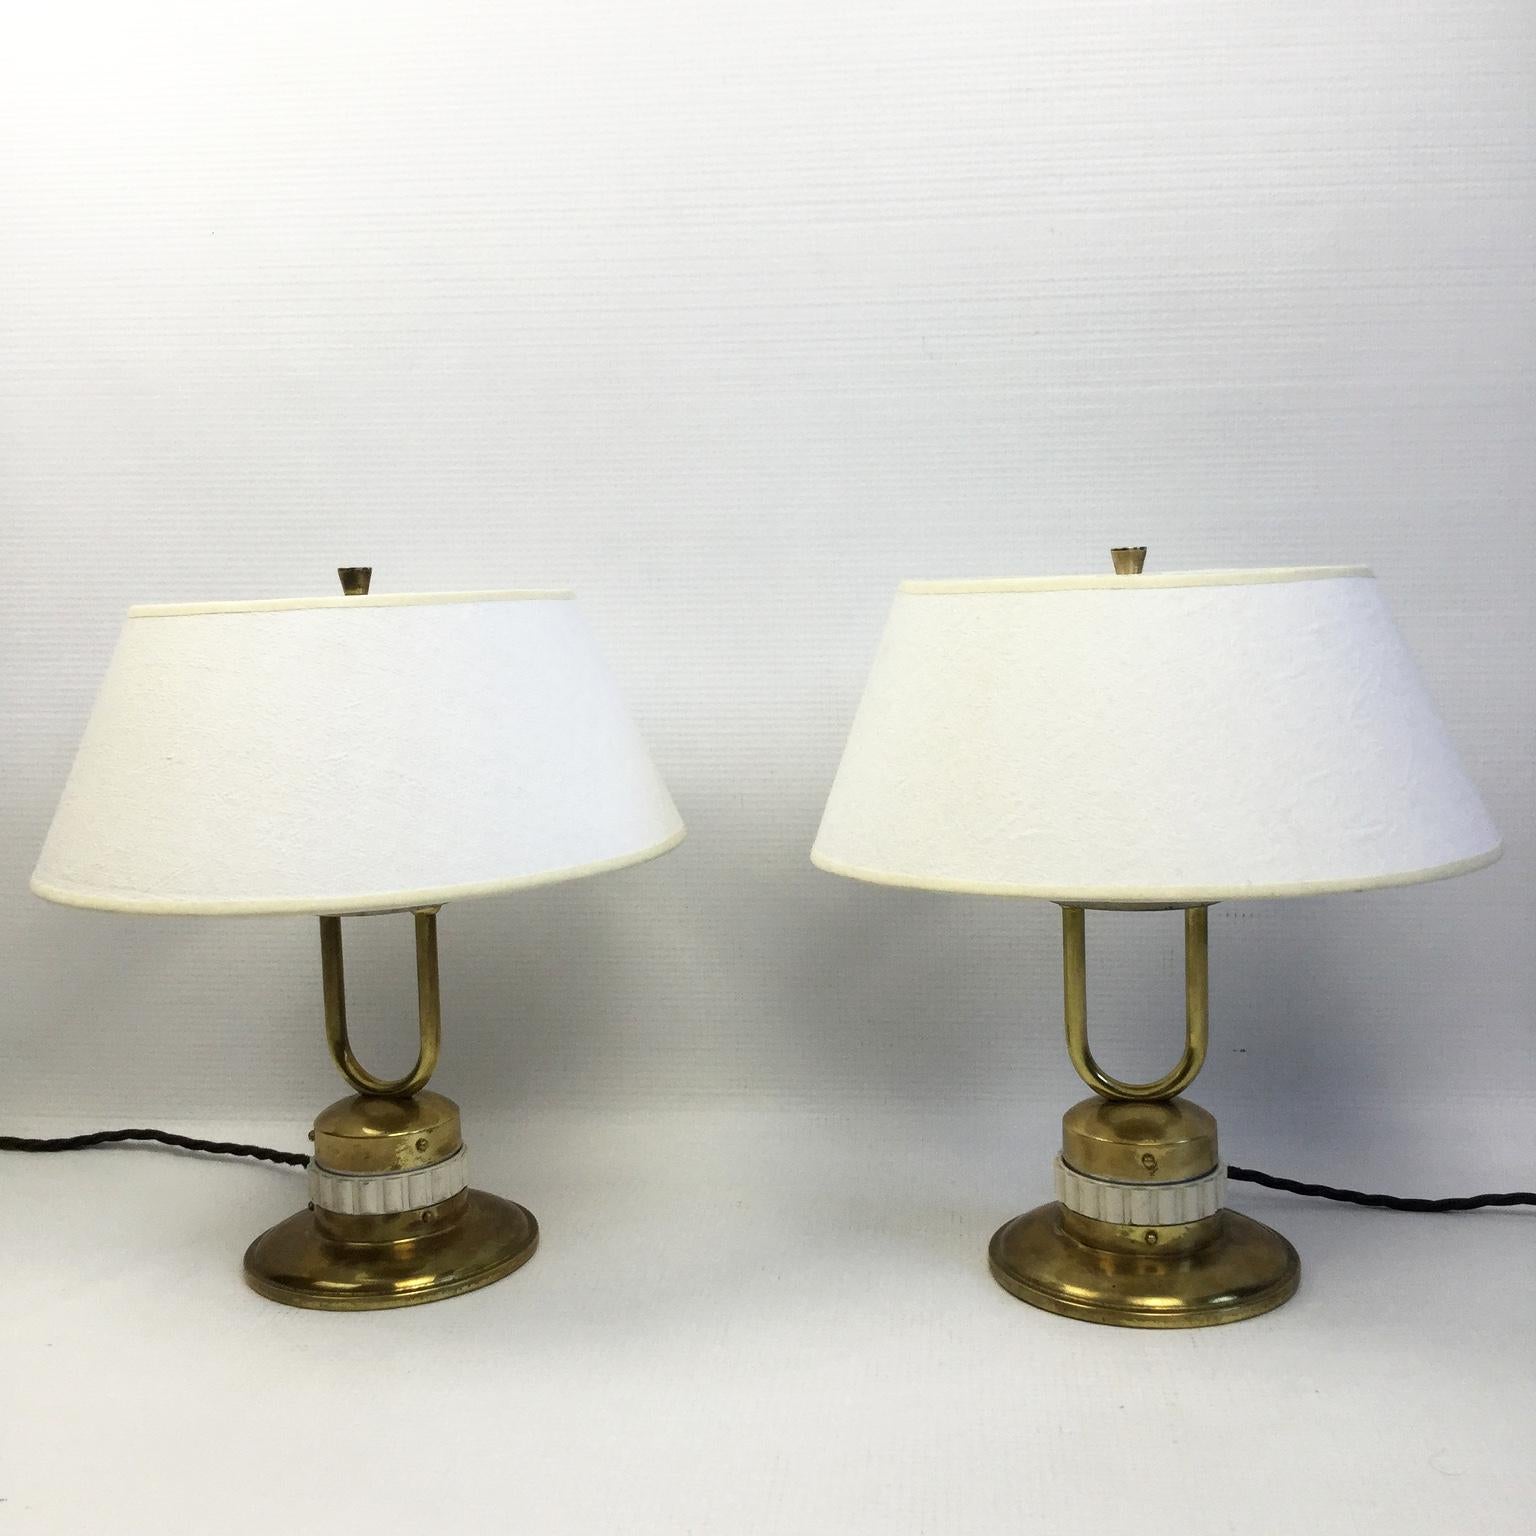 Mid-20th Century Pair of Brass Table Lamps for Maison Jumo Varilux France 1960s